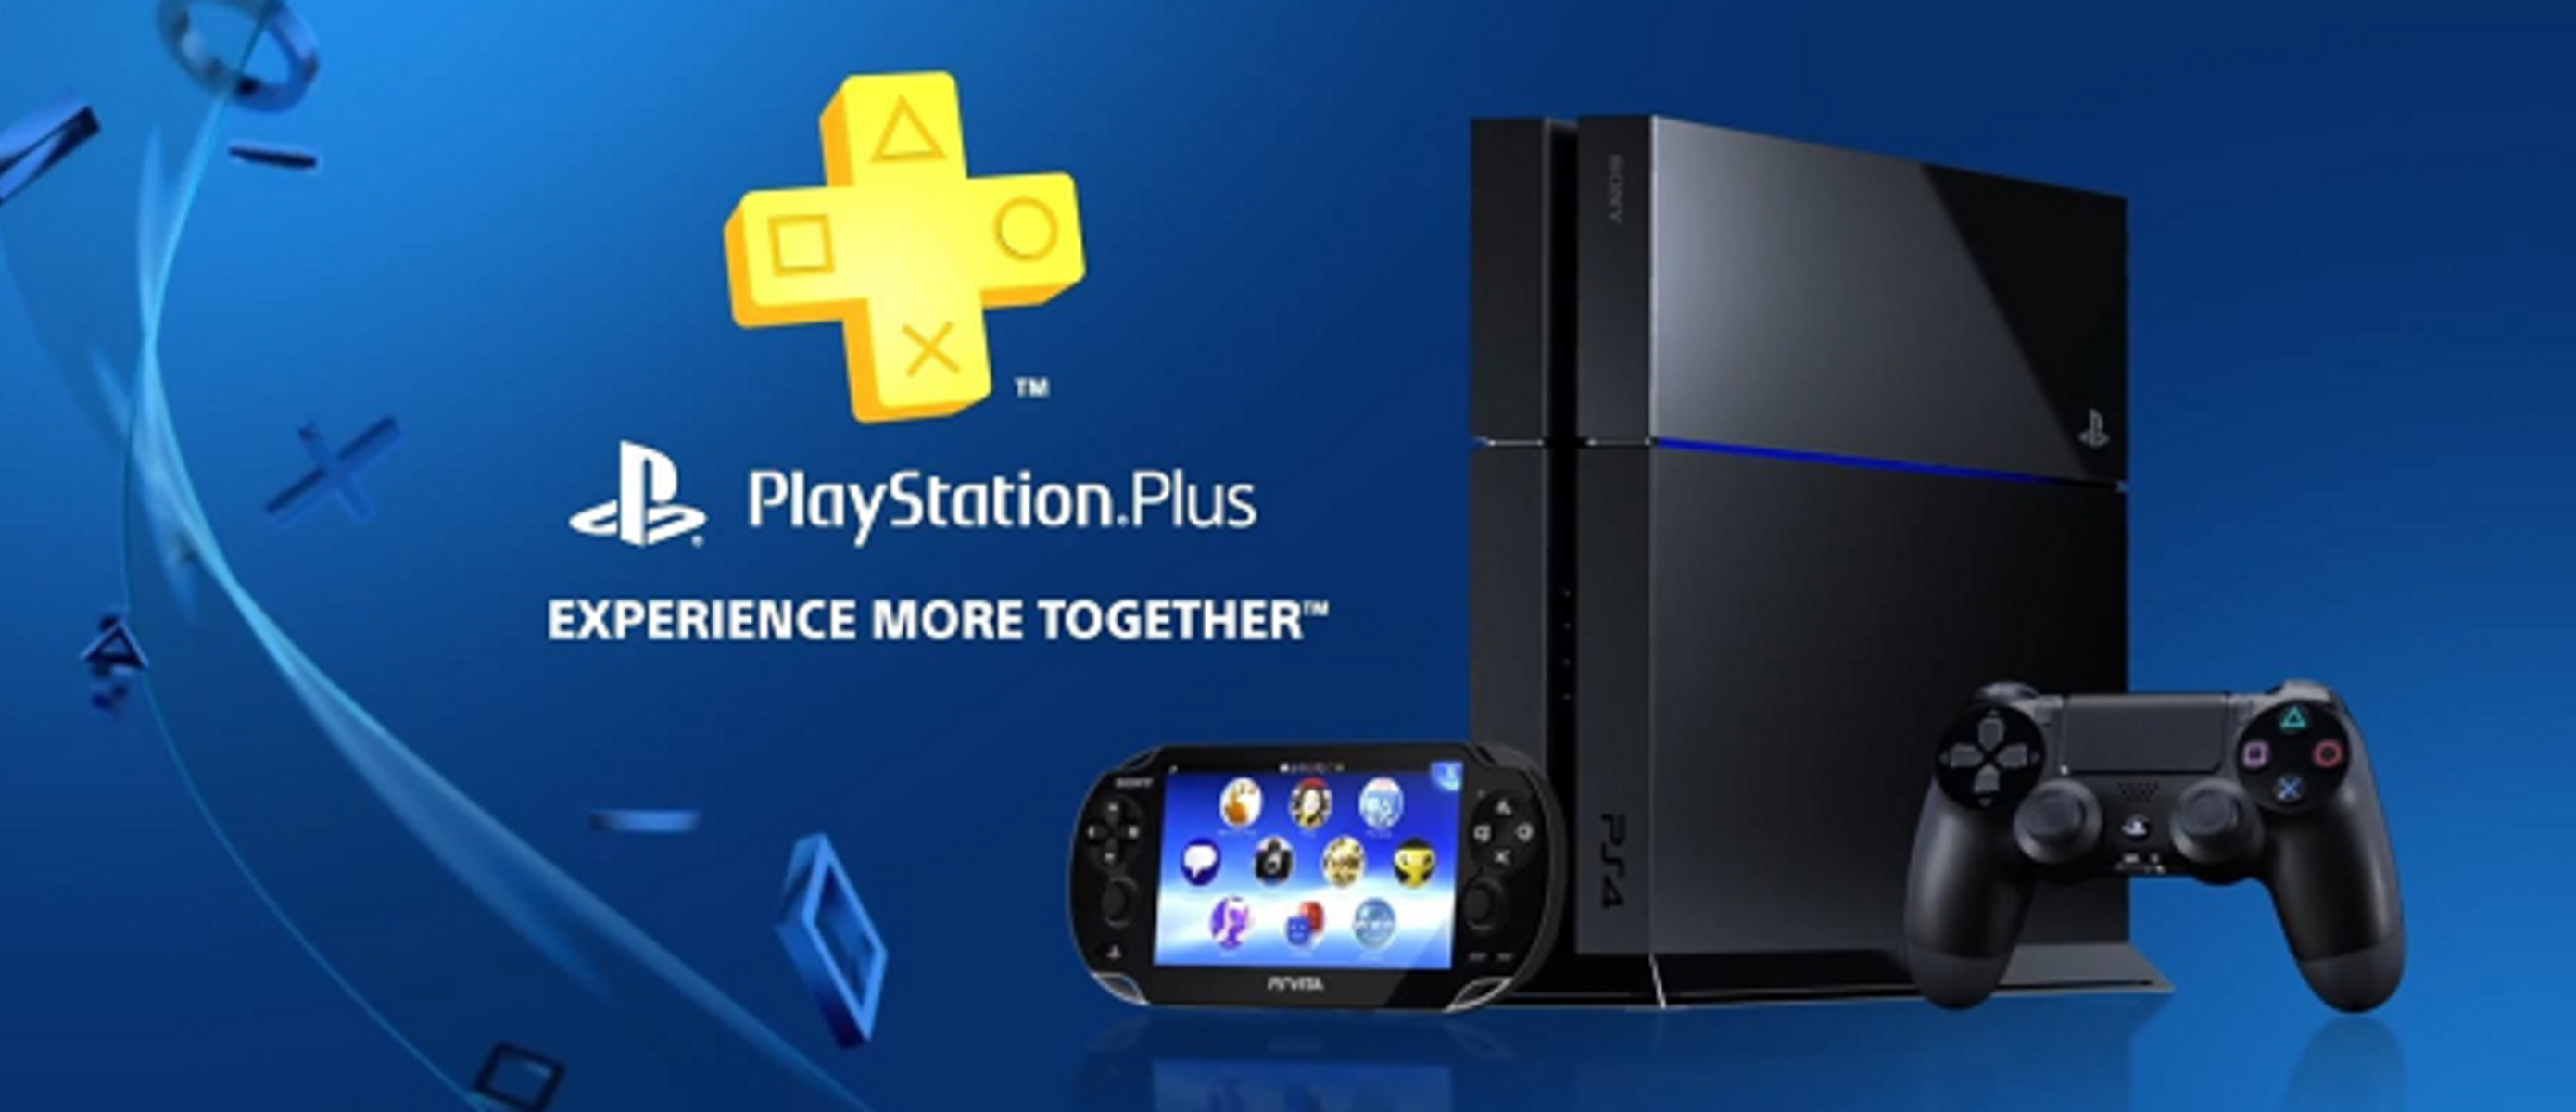 Игры ps4 plus. Сони плейстейшен 4 плюс. PLAYSTATION 4 PS Plus. PS Plus ps4. PLAYSTATION Plus Deluxe.